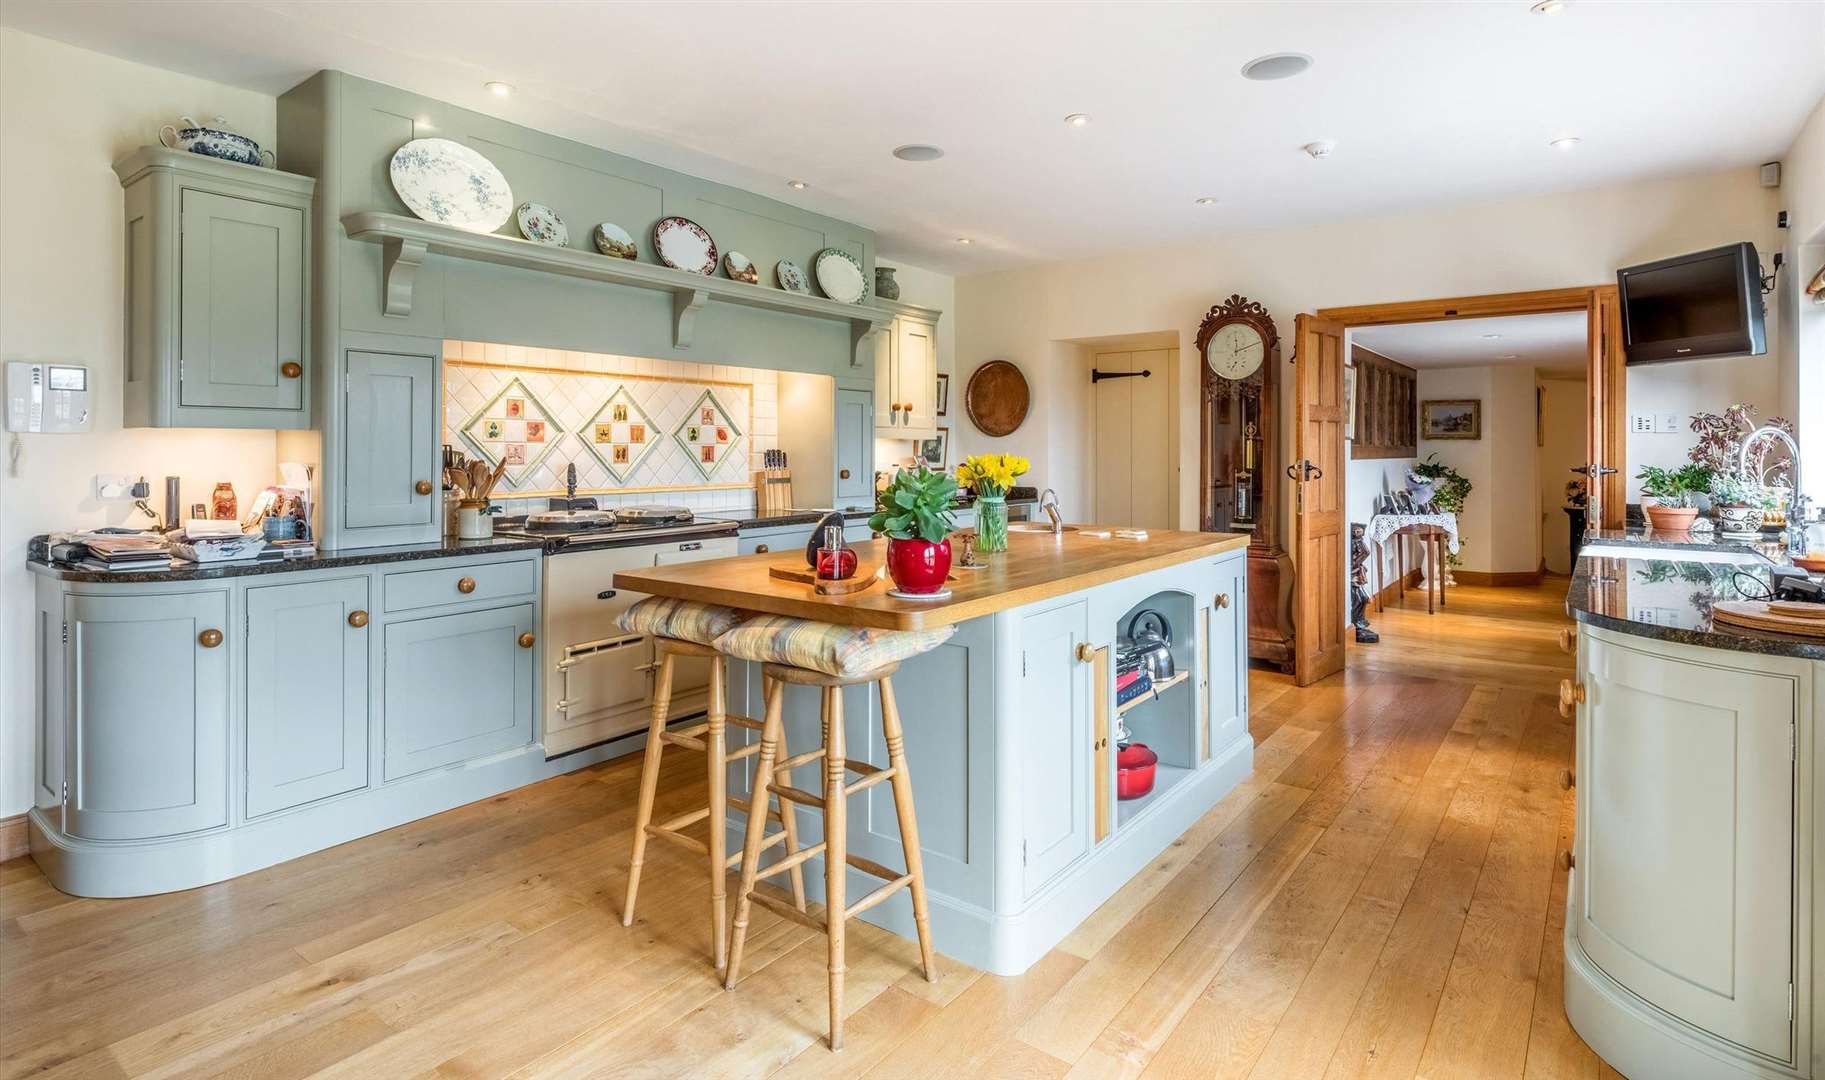 The kitchen and breakfast room has an aga and fitted appliances. Picture: Knight Frank